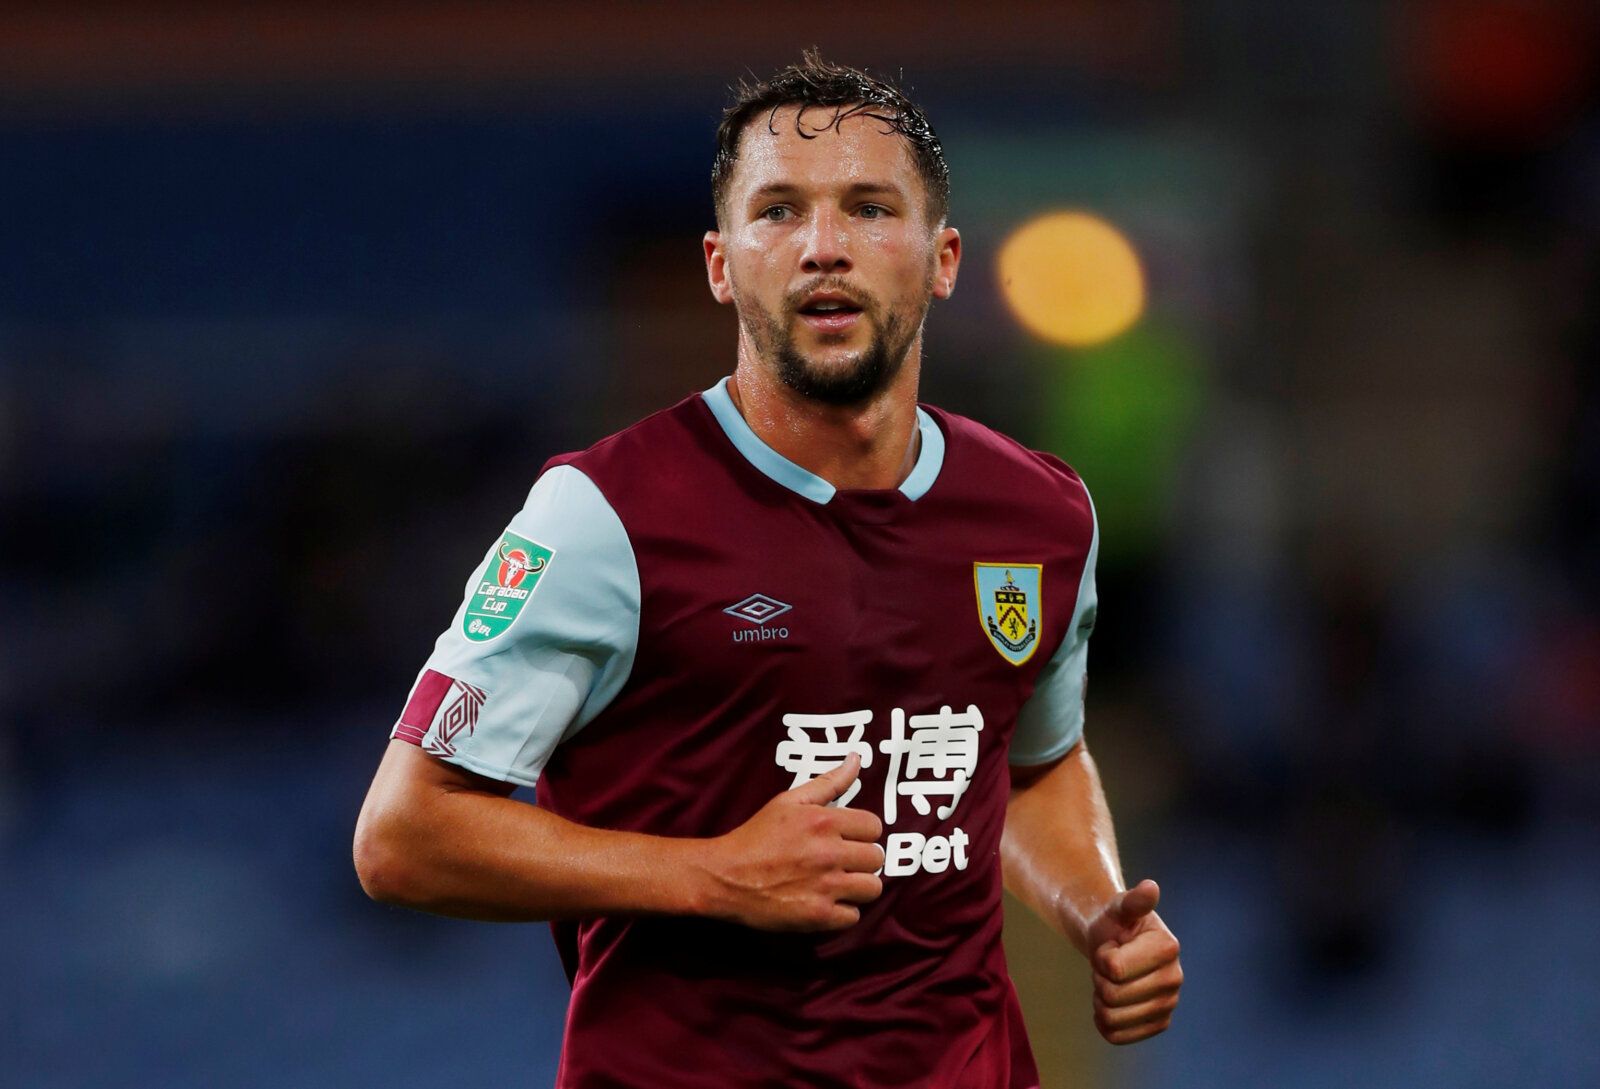 Soccer Football - Carabao Cup Second Round - Burnley v Sunderland - Turf Moor, Burnley, Britain - August 28, 2019  Burnley's Danny Drinkwater     Action Images via Reuters/Lee Smith  EDITORIAL USE ONLY. No use with unauthorized audio, video, data, fixture lists, club/league logos or 